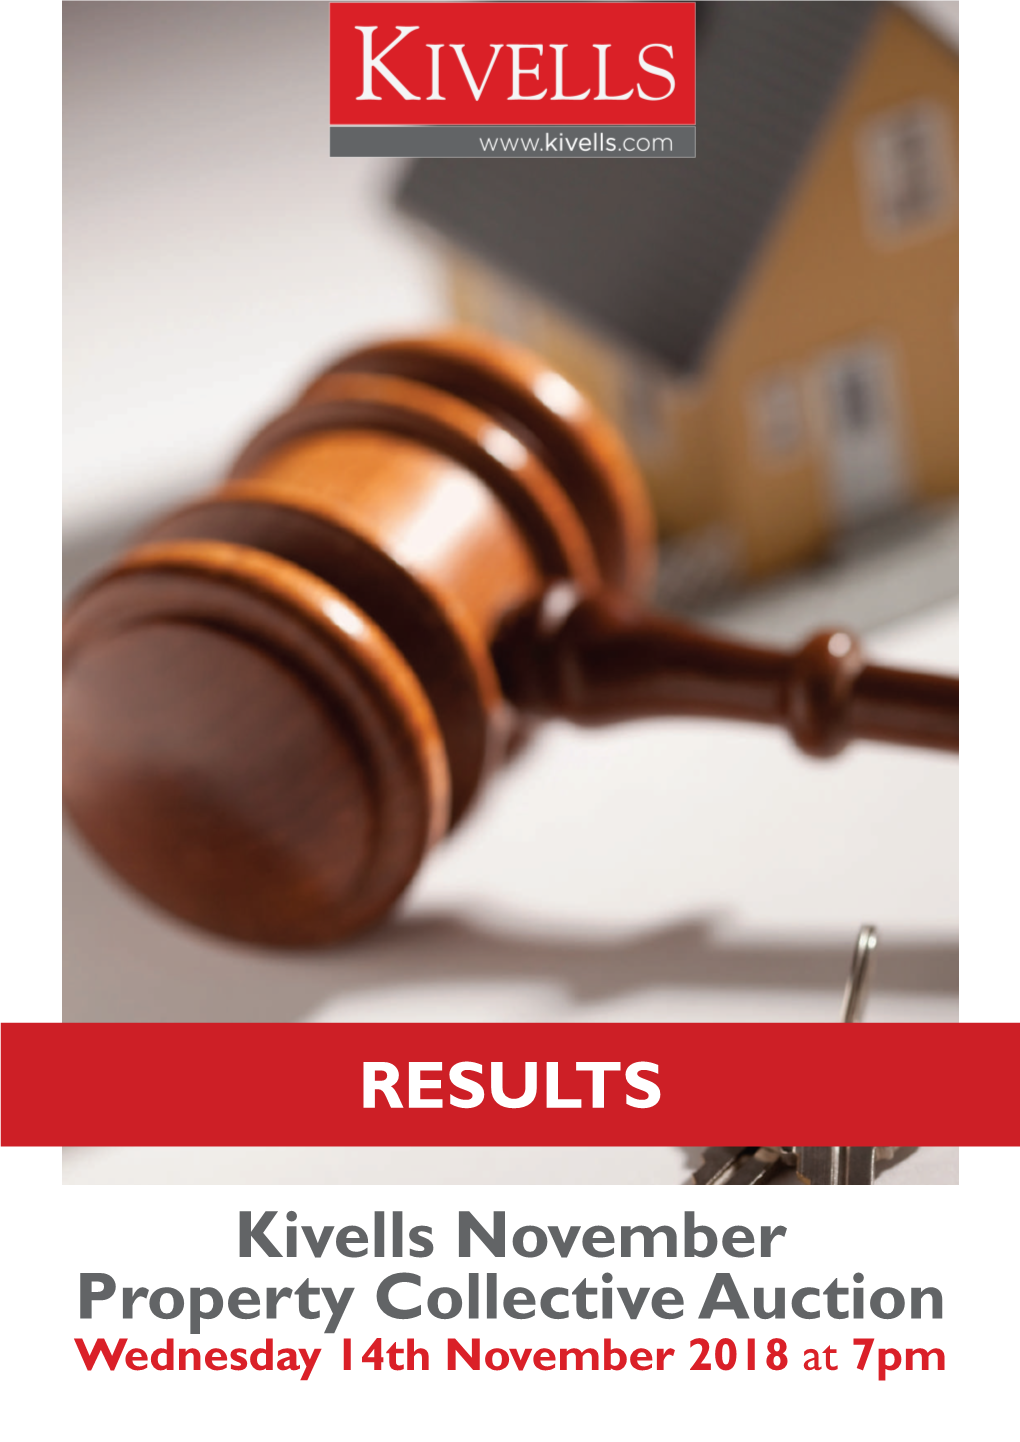 Kivells November Property Collective Auction RESULTS